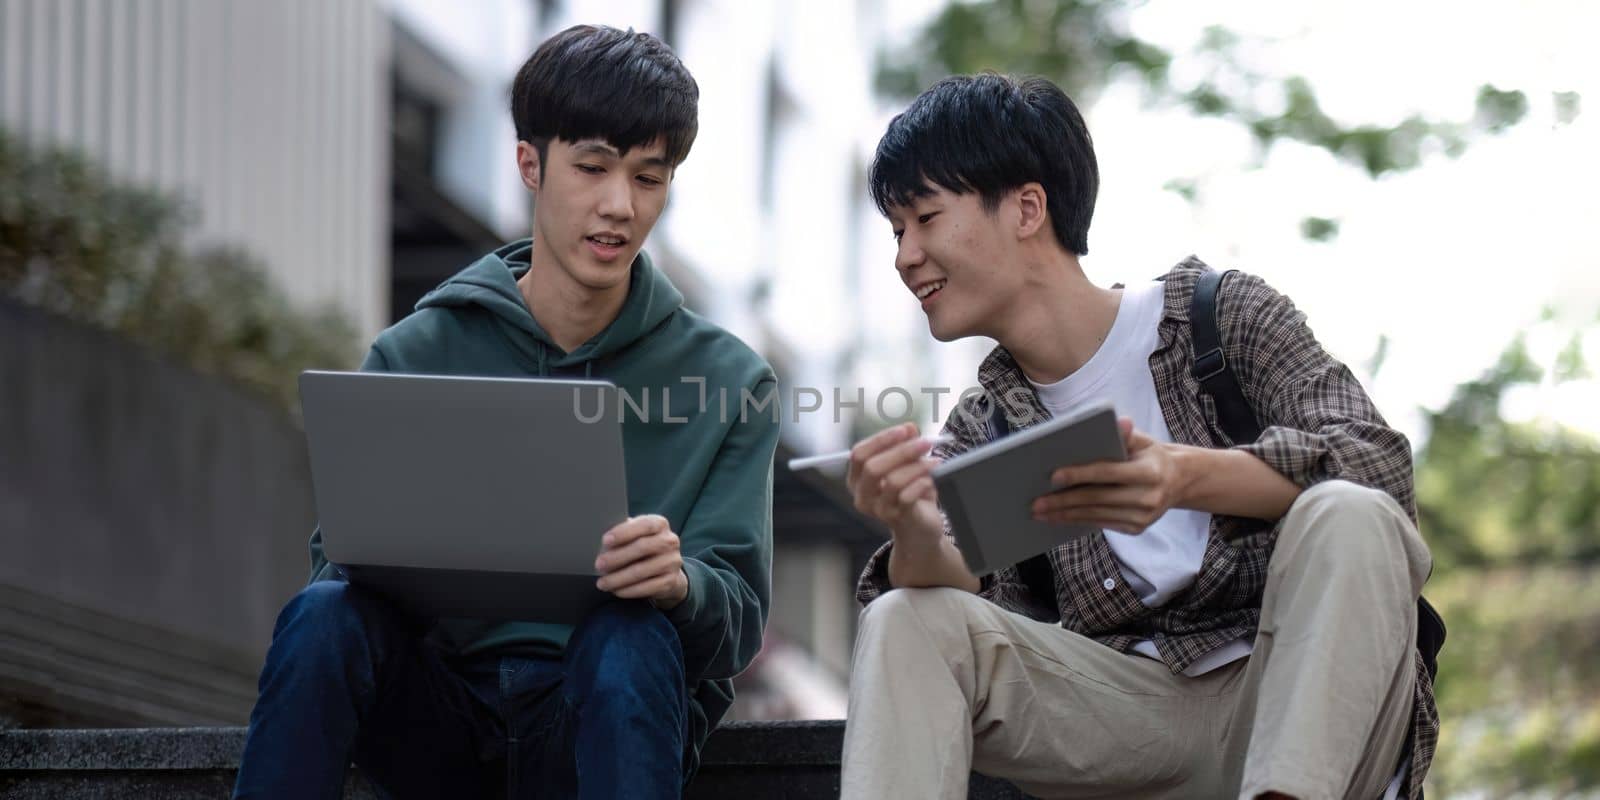 Two young Asian male college students discussing and working on their school project together by nateemee